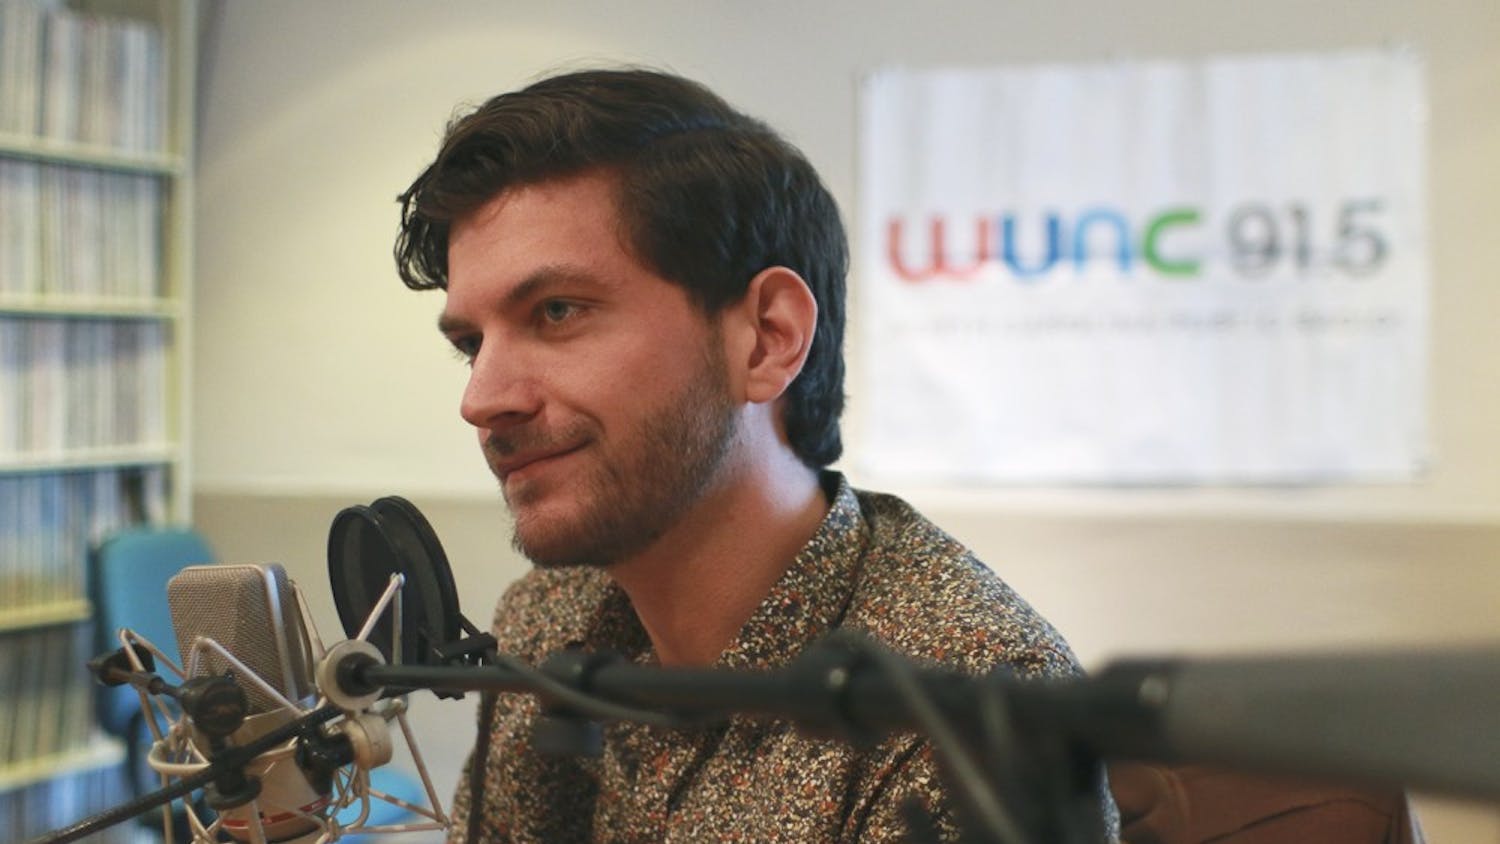 Will McInerney recorded a new podcast with Mohammed Moussa (not pictured) at WUNC Studios in Chapel Hill on Friday. The podcast will cover issues such as social justice and cultural inequality and is part of a series called Stories With a Heartbeat that is set to be released this spring.